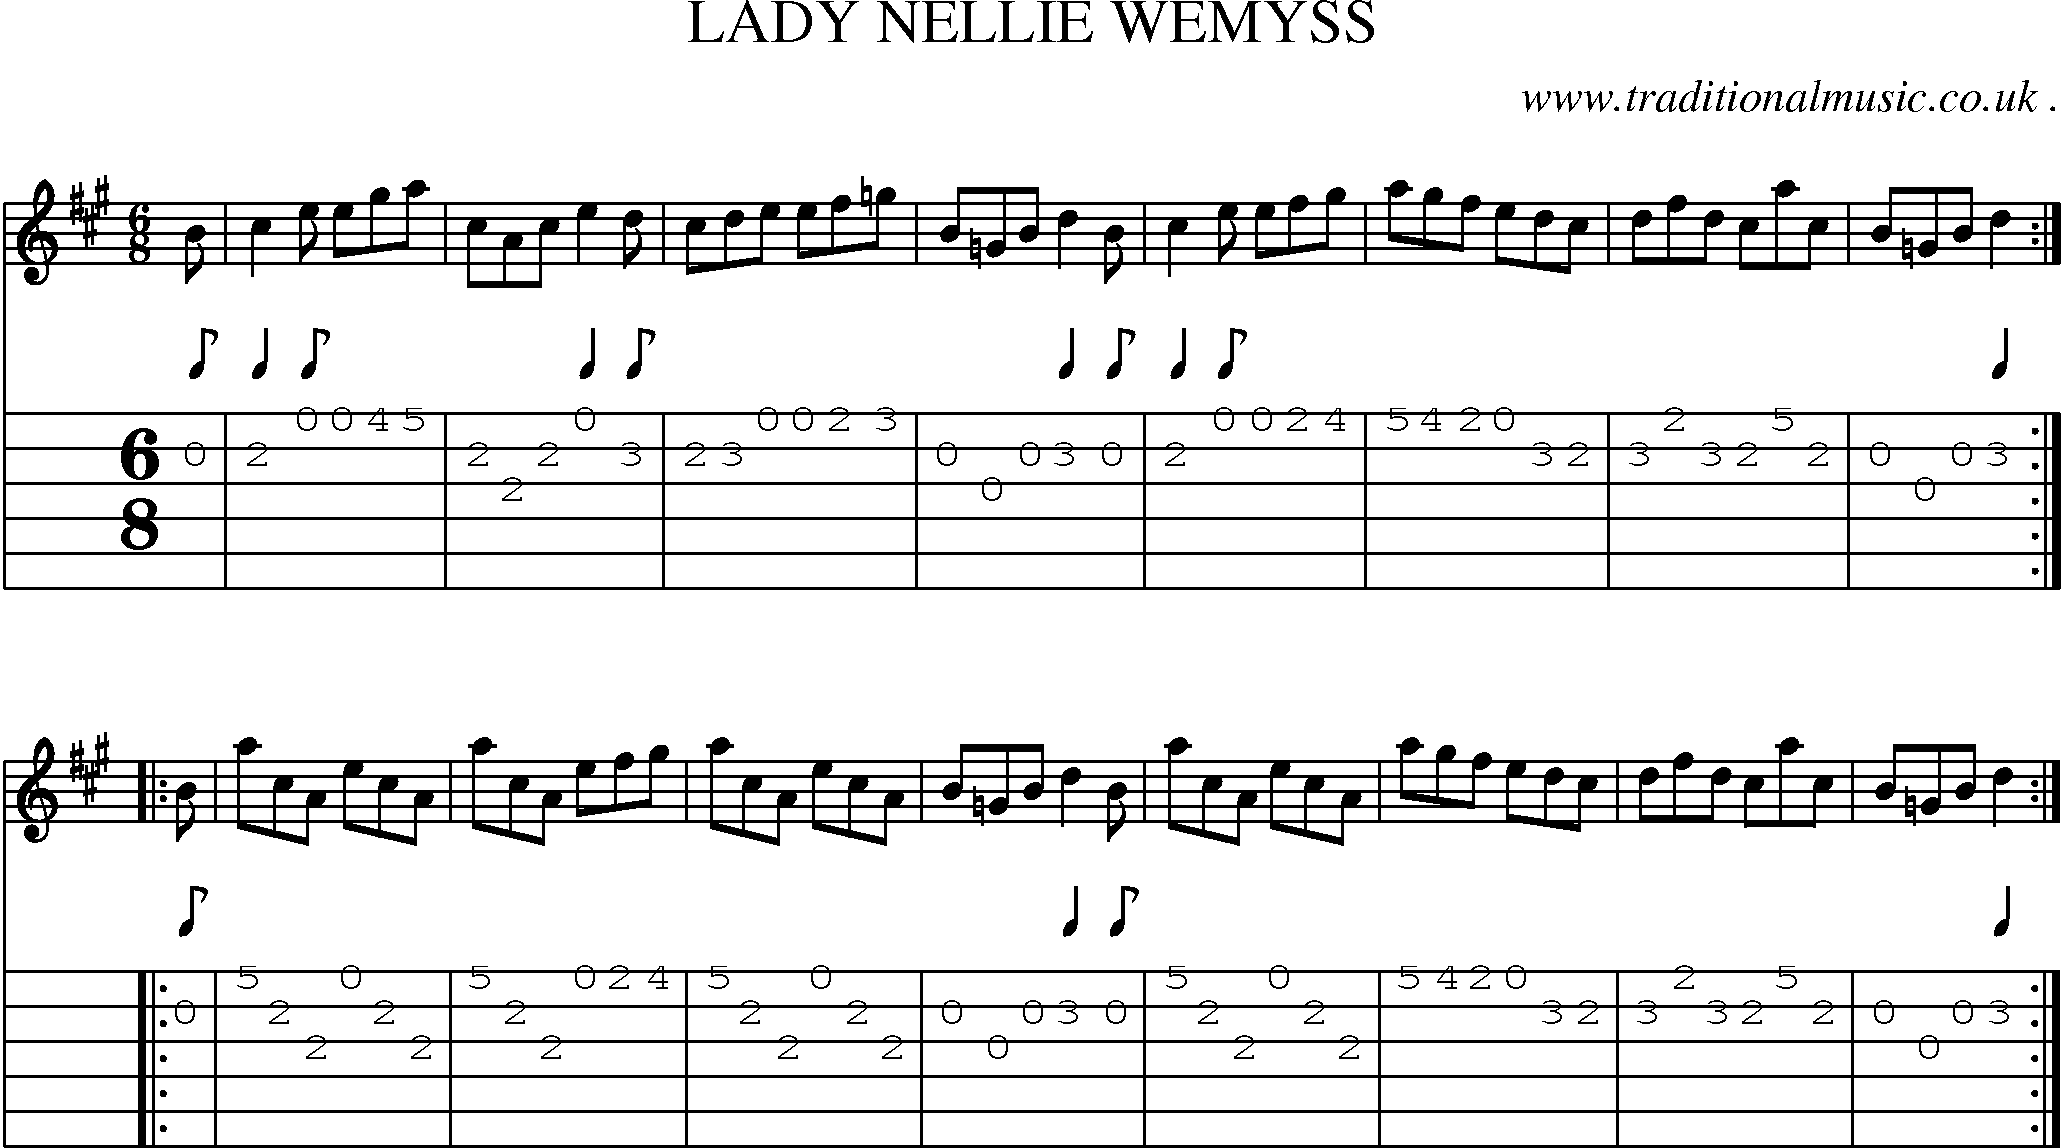 Sheet-music  score, Chords and Guitar Tabs for Lady Nellie Wemyss